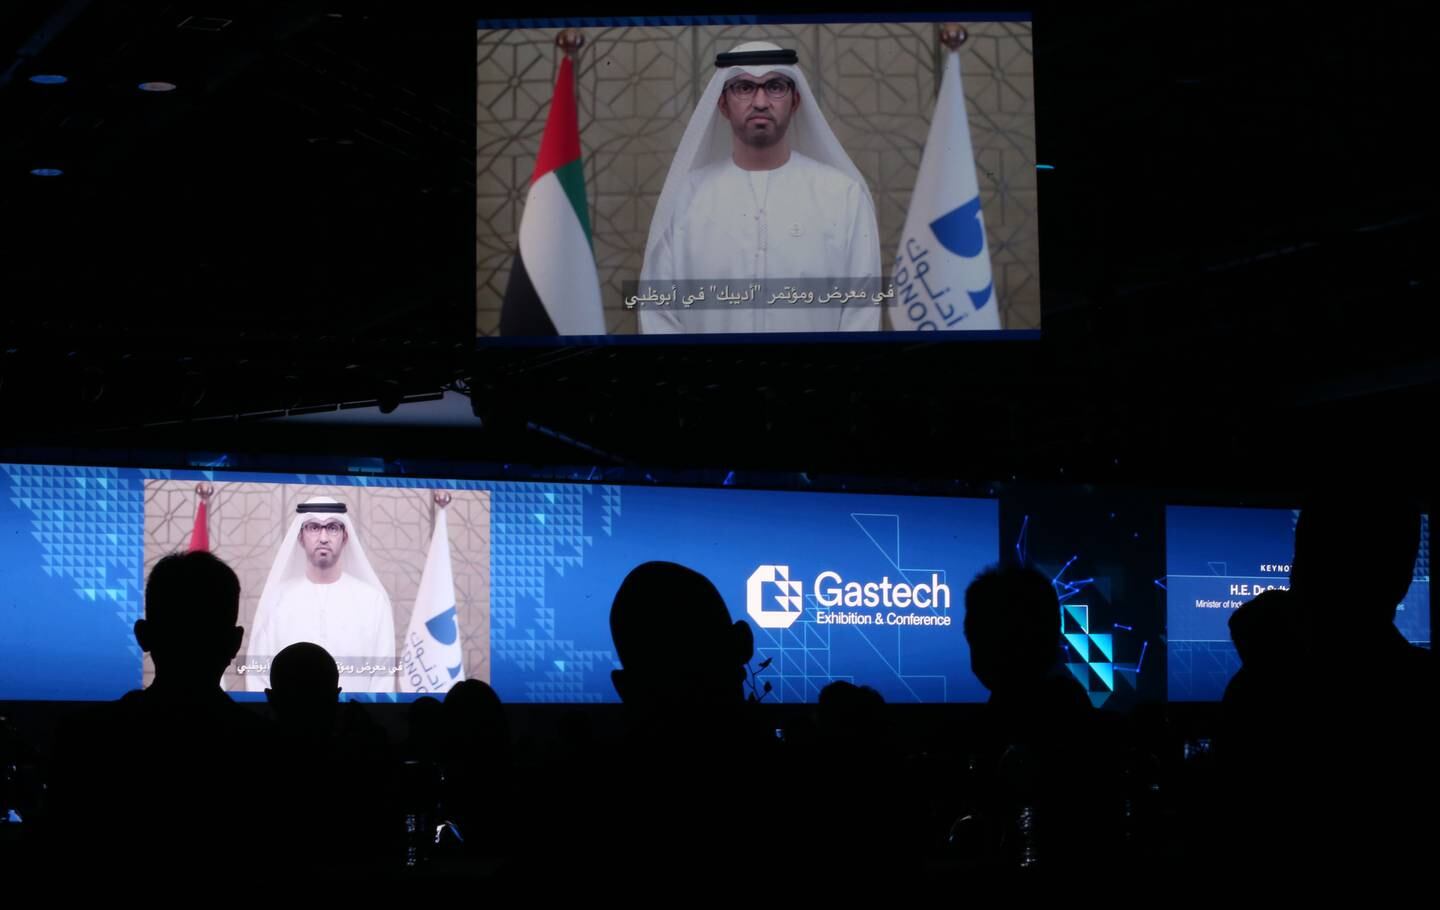 Attendees listen to recorded speech by Sultan Ahmed Al Jaber Minister of Industry and Advanced Technology and Managing Director and Group CEO of ADNOC of the UAE during the opening ceremony of the Gastech Exhibition and Conference in Dubai, September 21, 2021. EPA